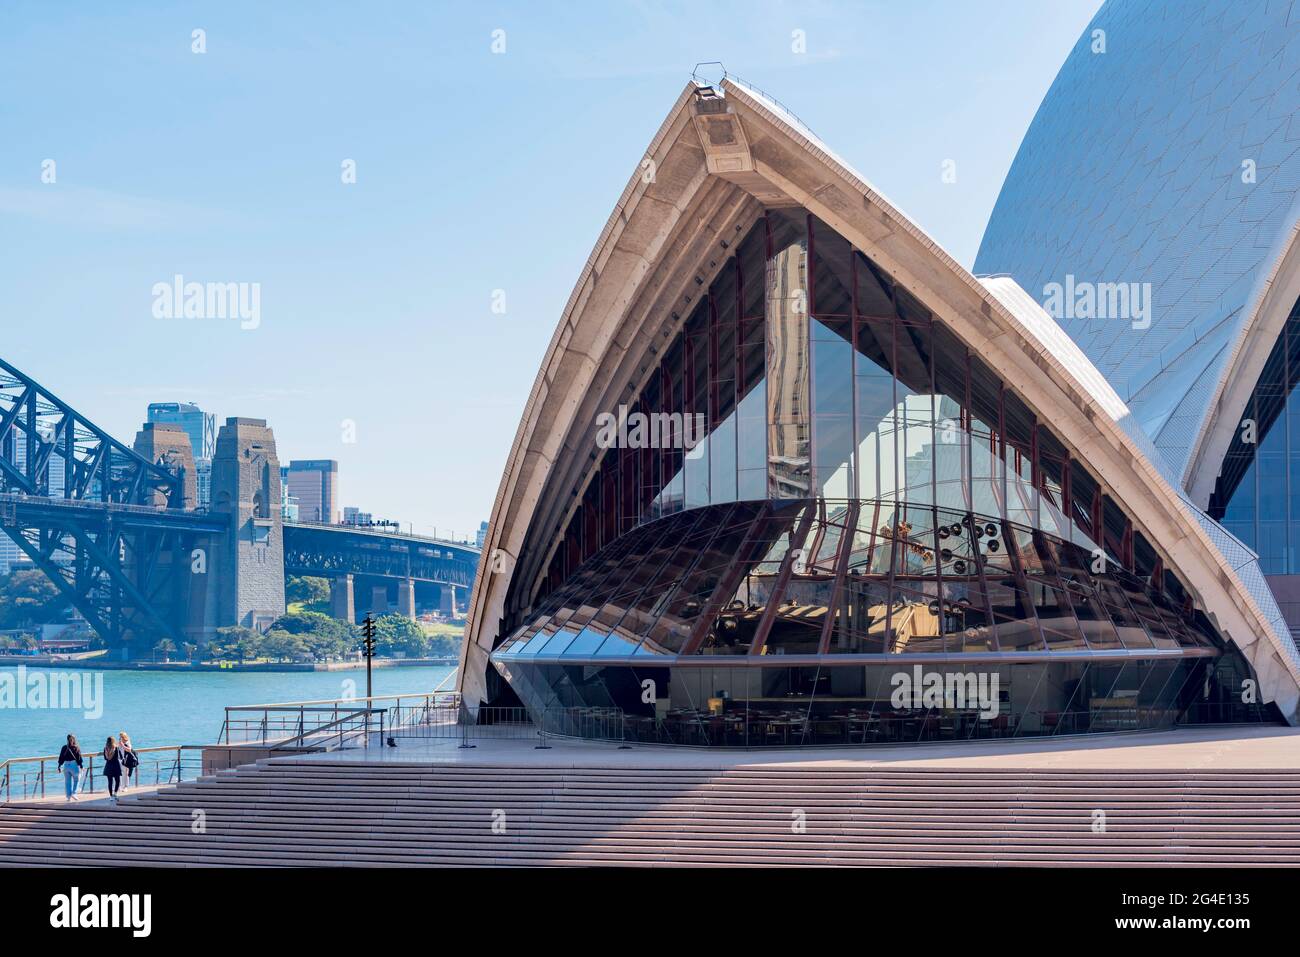 The southern most shell or sail of the Sydney Opera House that houses the famous Bennelong Restaurant in Sydney, Australia Stock Photo